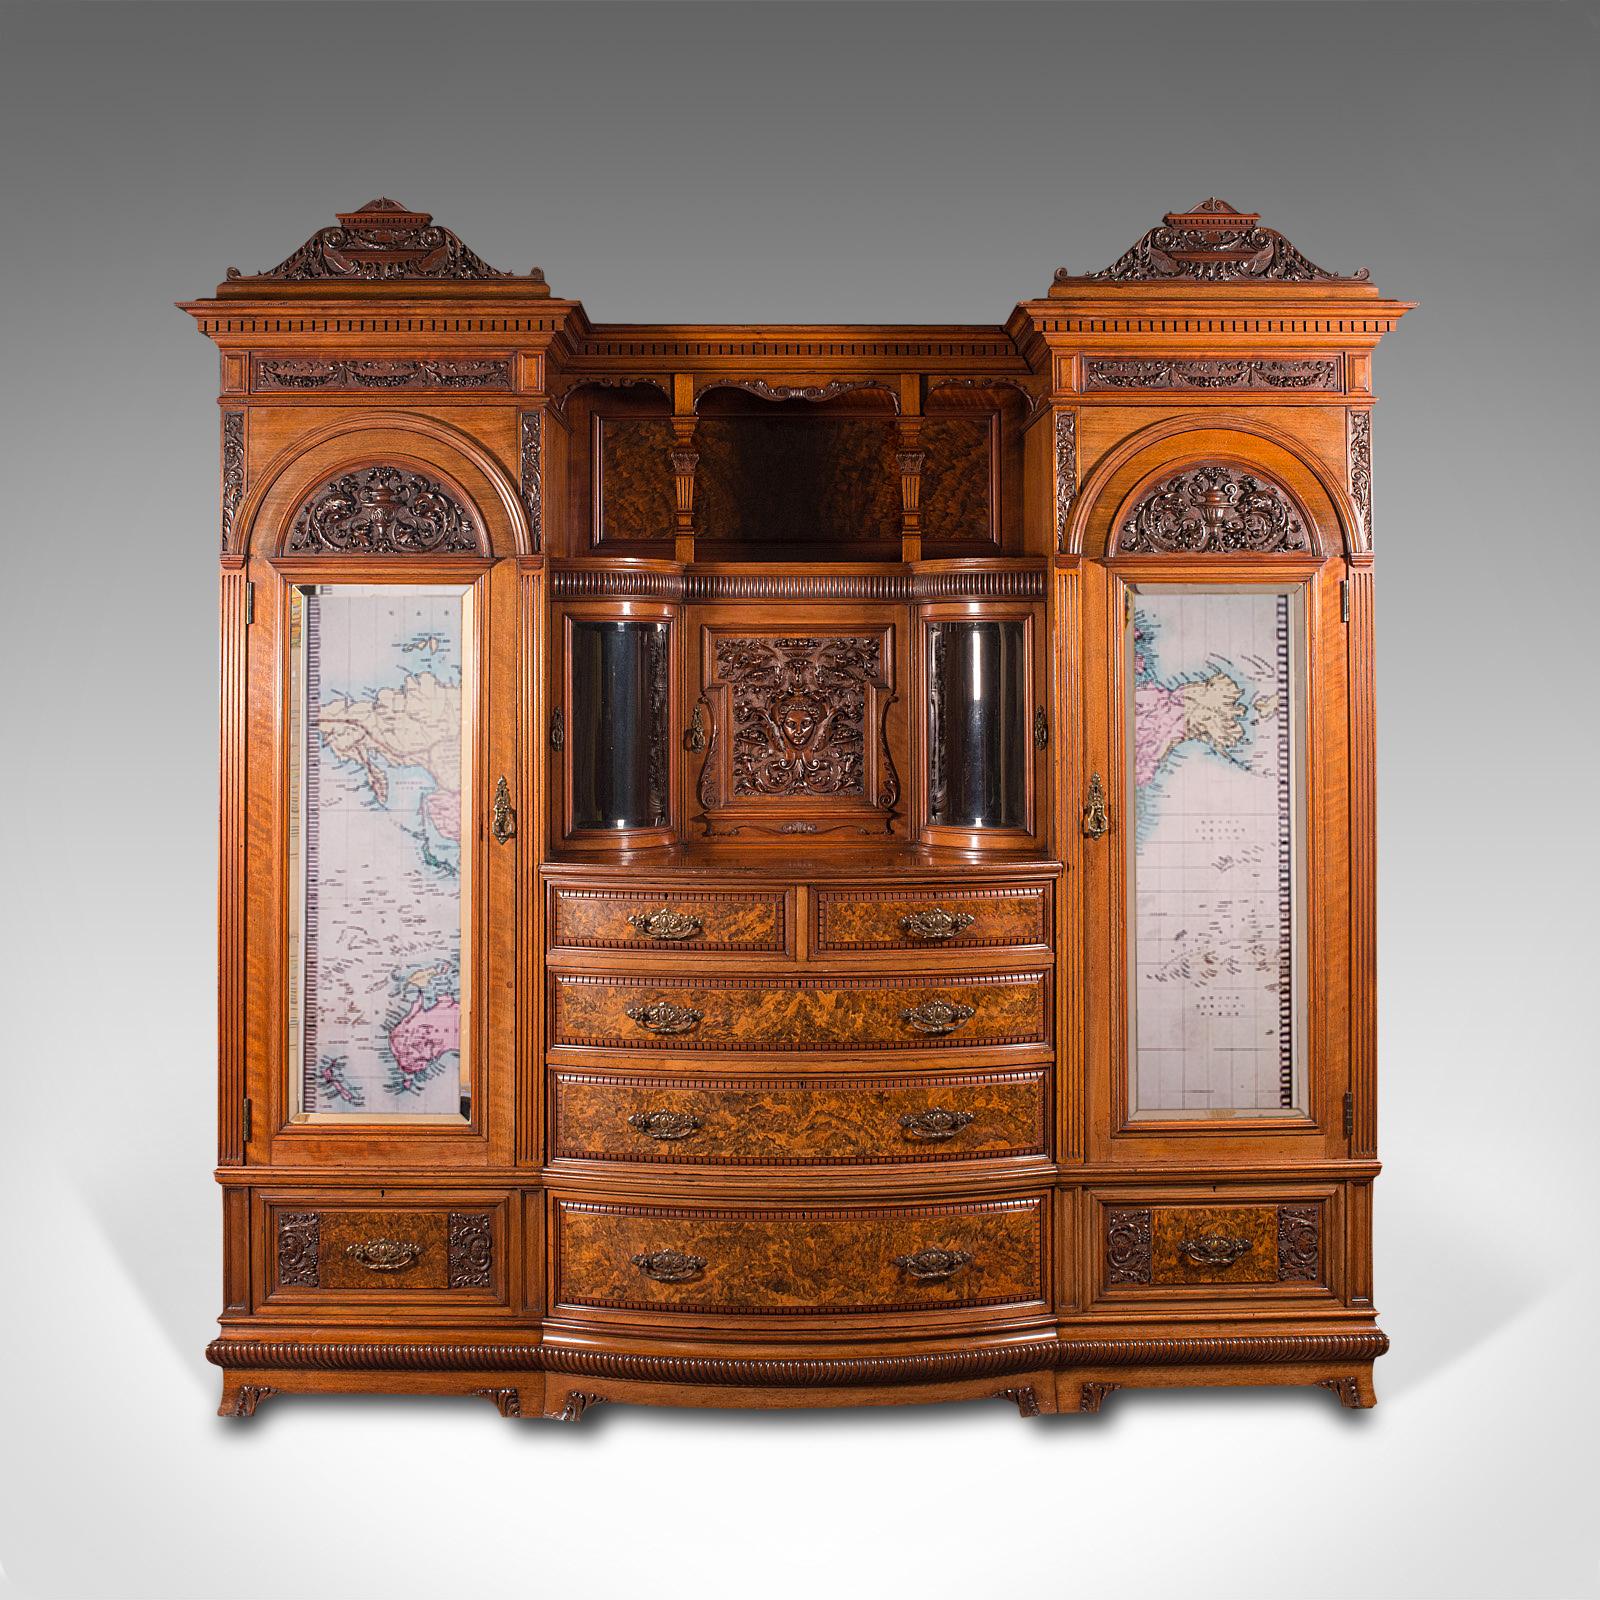 This is a large fine antique gentleman's wardrobe compactum. An English, walnut bedroom cabinet by Gillow and Co of Lancaster, dating to the Victorian period, circa 1880.

A grand wardrobe of the first order - a testament to Gillows'